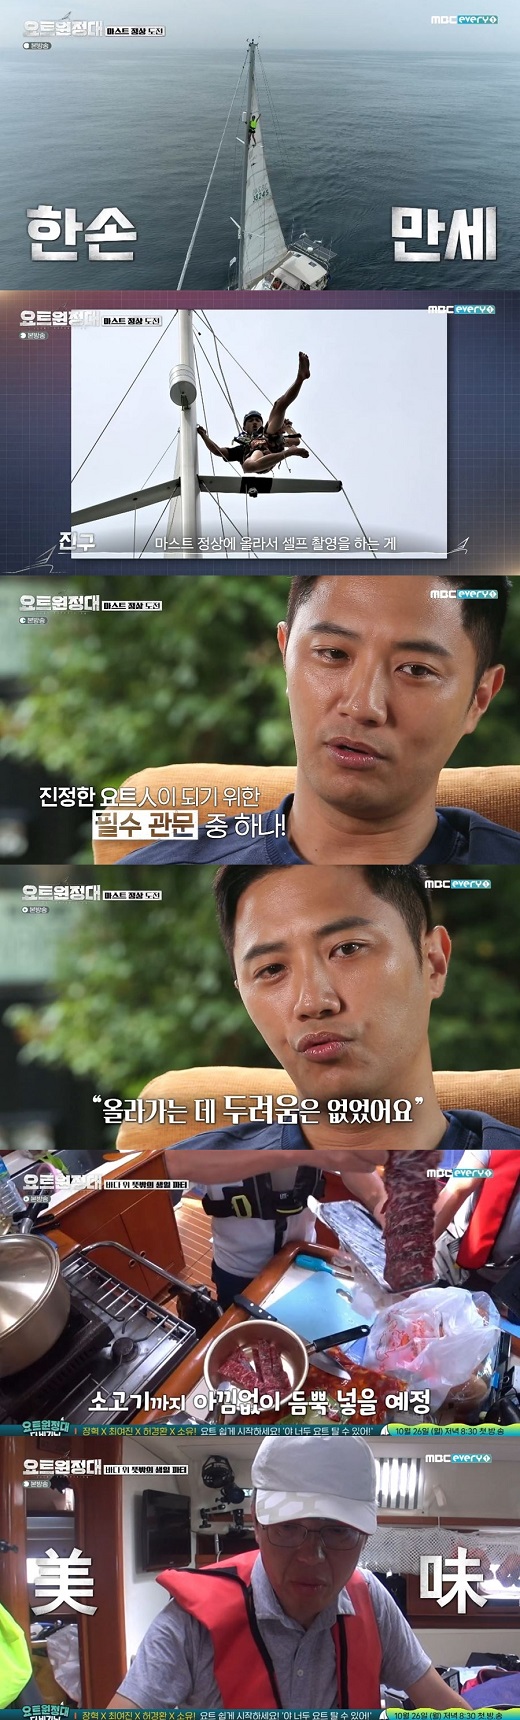 The Yacht Expedition ended the grand finale.On the afternoon of the 19th, MBC Everlon Yot Expedition was the last Summertime of actor Jin Goo, singer and actor Choi Siwon, Singer Chang Kiha and writer Song Ho-joon.On the 12th day of the voyage, the crew headed to the sound road, called the Treasure Island, where there were long traces of time engraved throughout the cave.Song Ho-joon was able to appreciate the scenery with the base of the director of the filming, although he was unable to secure the view due to impurities, and he was able to appreciate the scenery.Then I experienced climbing the mast to the top of the yacht. Captain Kim Seung-jin said, I think it is the best learning to experience it with your body.It is a way to ride the outer line using the juma ring used for climbing. I want to teach you how to climb the top of the mast. The first Top Model Chang Kiha climbed to the top of the mast and shouted Long Live, while Jin Goo showed a hand-shaking ease without a hint of fear.I heard it was the orthodox of the yacht, I was not afraid to go up to whether I was close to the yacht or the sea, Jin Goo told the production team.The ship party was held. Captain Kim Seung-jin and team doctor Lim Soo-bin, who were on the meal line, prepared seaweed soup without knowing the crew.Song Ho-joon, who received Choi Siwons Gift, laughed brightly, saying, Thank you all, the celebration was unfolded.I do not know how to operate the yacht, Chang Kiha said. Even if I did not do well, there was no problem with the voyage.I reaffirmed that I was a scarce man, but I was glad that I could live with someone else and live a life without Mask.I thought of a friend on land, he confessed.Every yacht can ride, but no one can ride, and if you are vigilant, you get hurt a lot, said Jin Goo, every day was hard: every time our member was a treasure.I would have been afraid when I first started. I would have felt a sense of discomfort when I returned. It was a great help because there was a thing that covered my fears. Captain Kim also mentioned the port of the paper cell, saying, The first and the end of the voyage are the most important.We will go to the daytime, but we will be careful about watching and go safely. After cleaning the yacht, they prepared a headline for the port of entry. Choi Siwon grooms Chang Kihas hairstyle and shows off his bromance chemistry.On the Hermagor-Presseger See, which unfolded before his eyes, Jin Goo said: It was like going to the army and going on my first vacation, it was grieving and clunky.The port I saw when I left the port of Hermagor-Pressegger See and the port I saw when I went back were too different. Chang Kiha, who stepped on the land after 17 days of summertime, said, I wanted to rest quickly until I saw Hermagor-Presseger See, but I was cluttered with the banners and welcome.I had a feeling of rising. Song Ho-joon also said, I was happy to be with good people. Meanwhile, Yot Expedition: The Big Ning, the second season of Yot Expedition, will be broadcasted at 8:30 pm on the 26th.